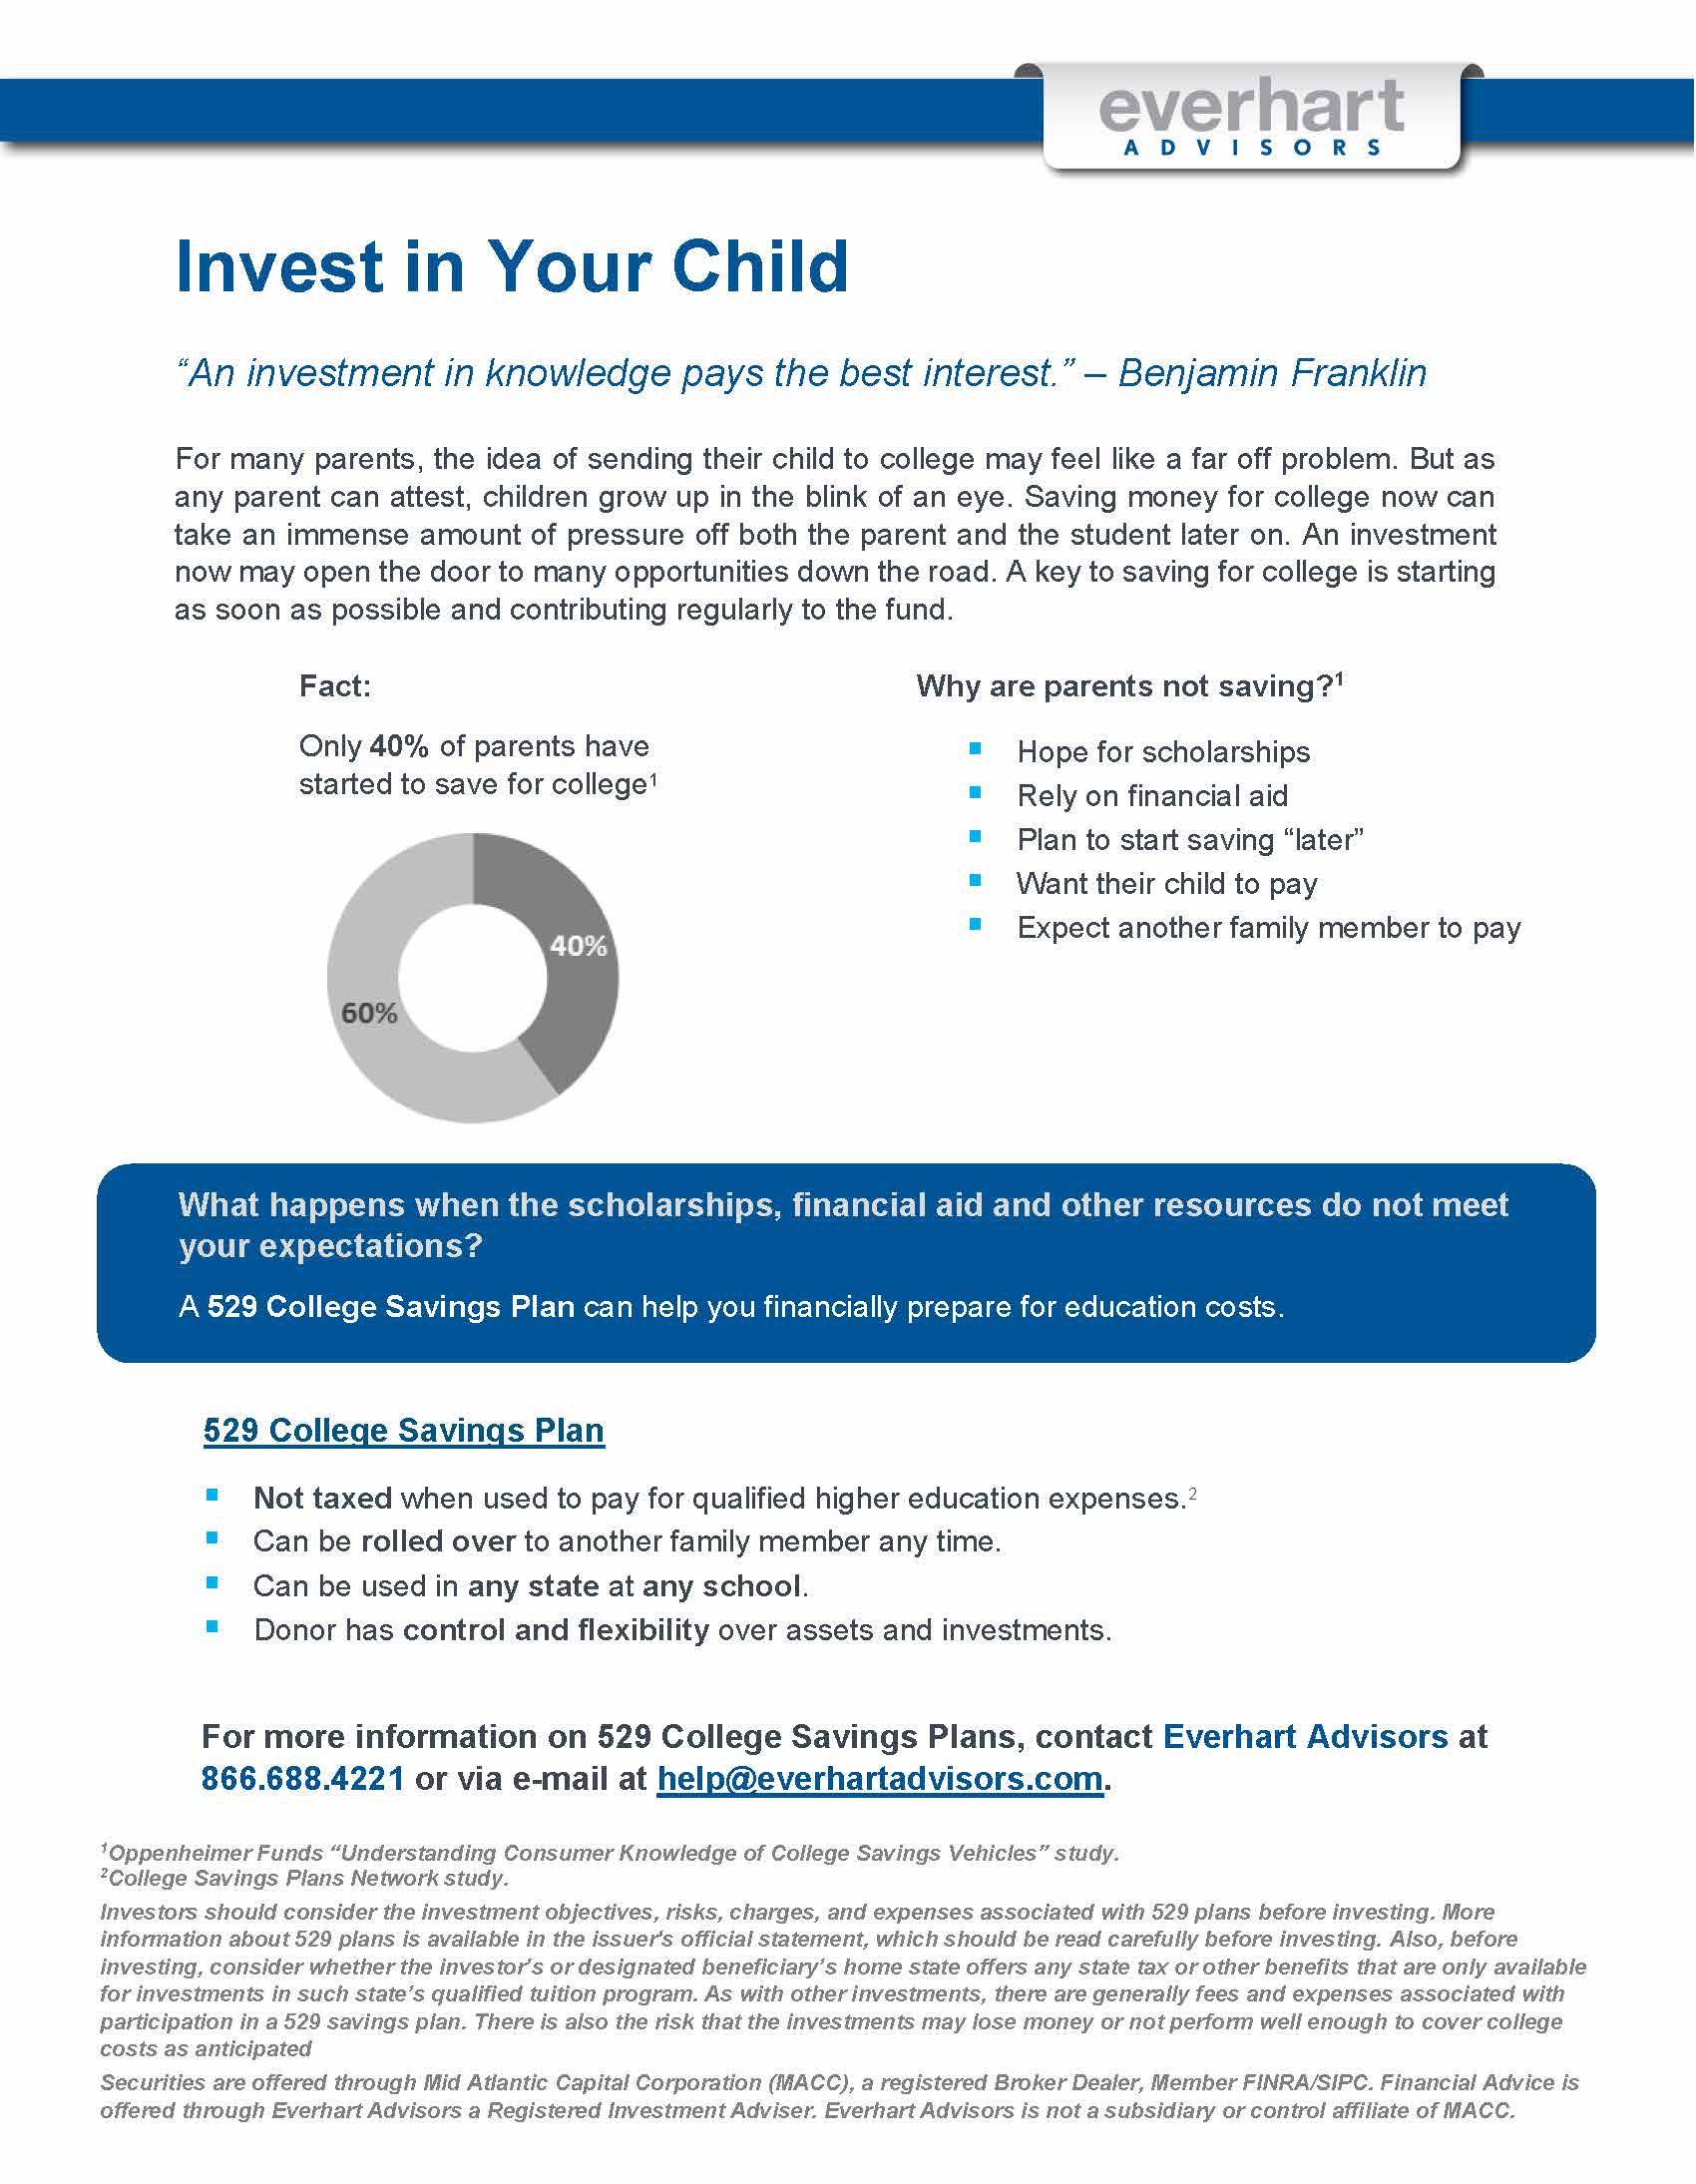 August 2016 Memo - Invest in Your Child